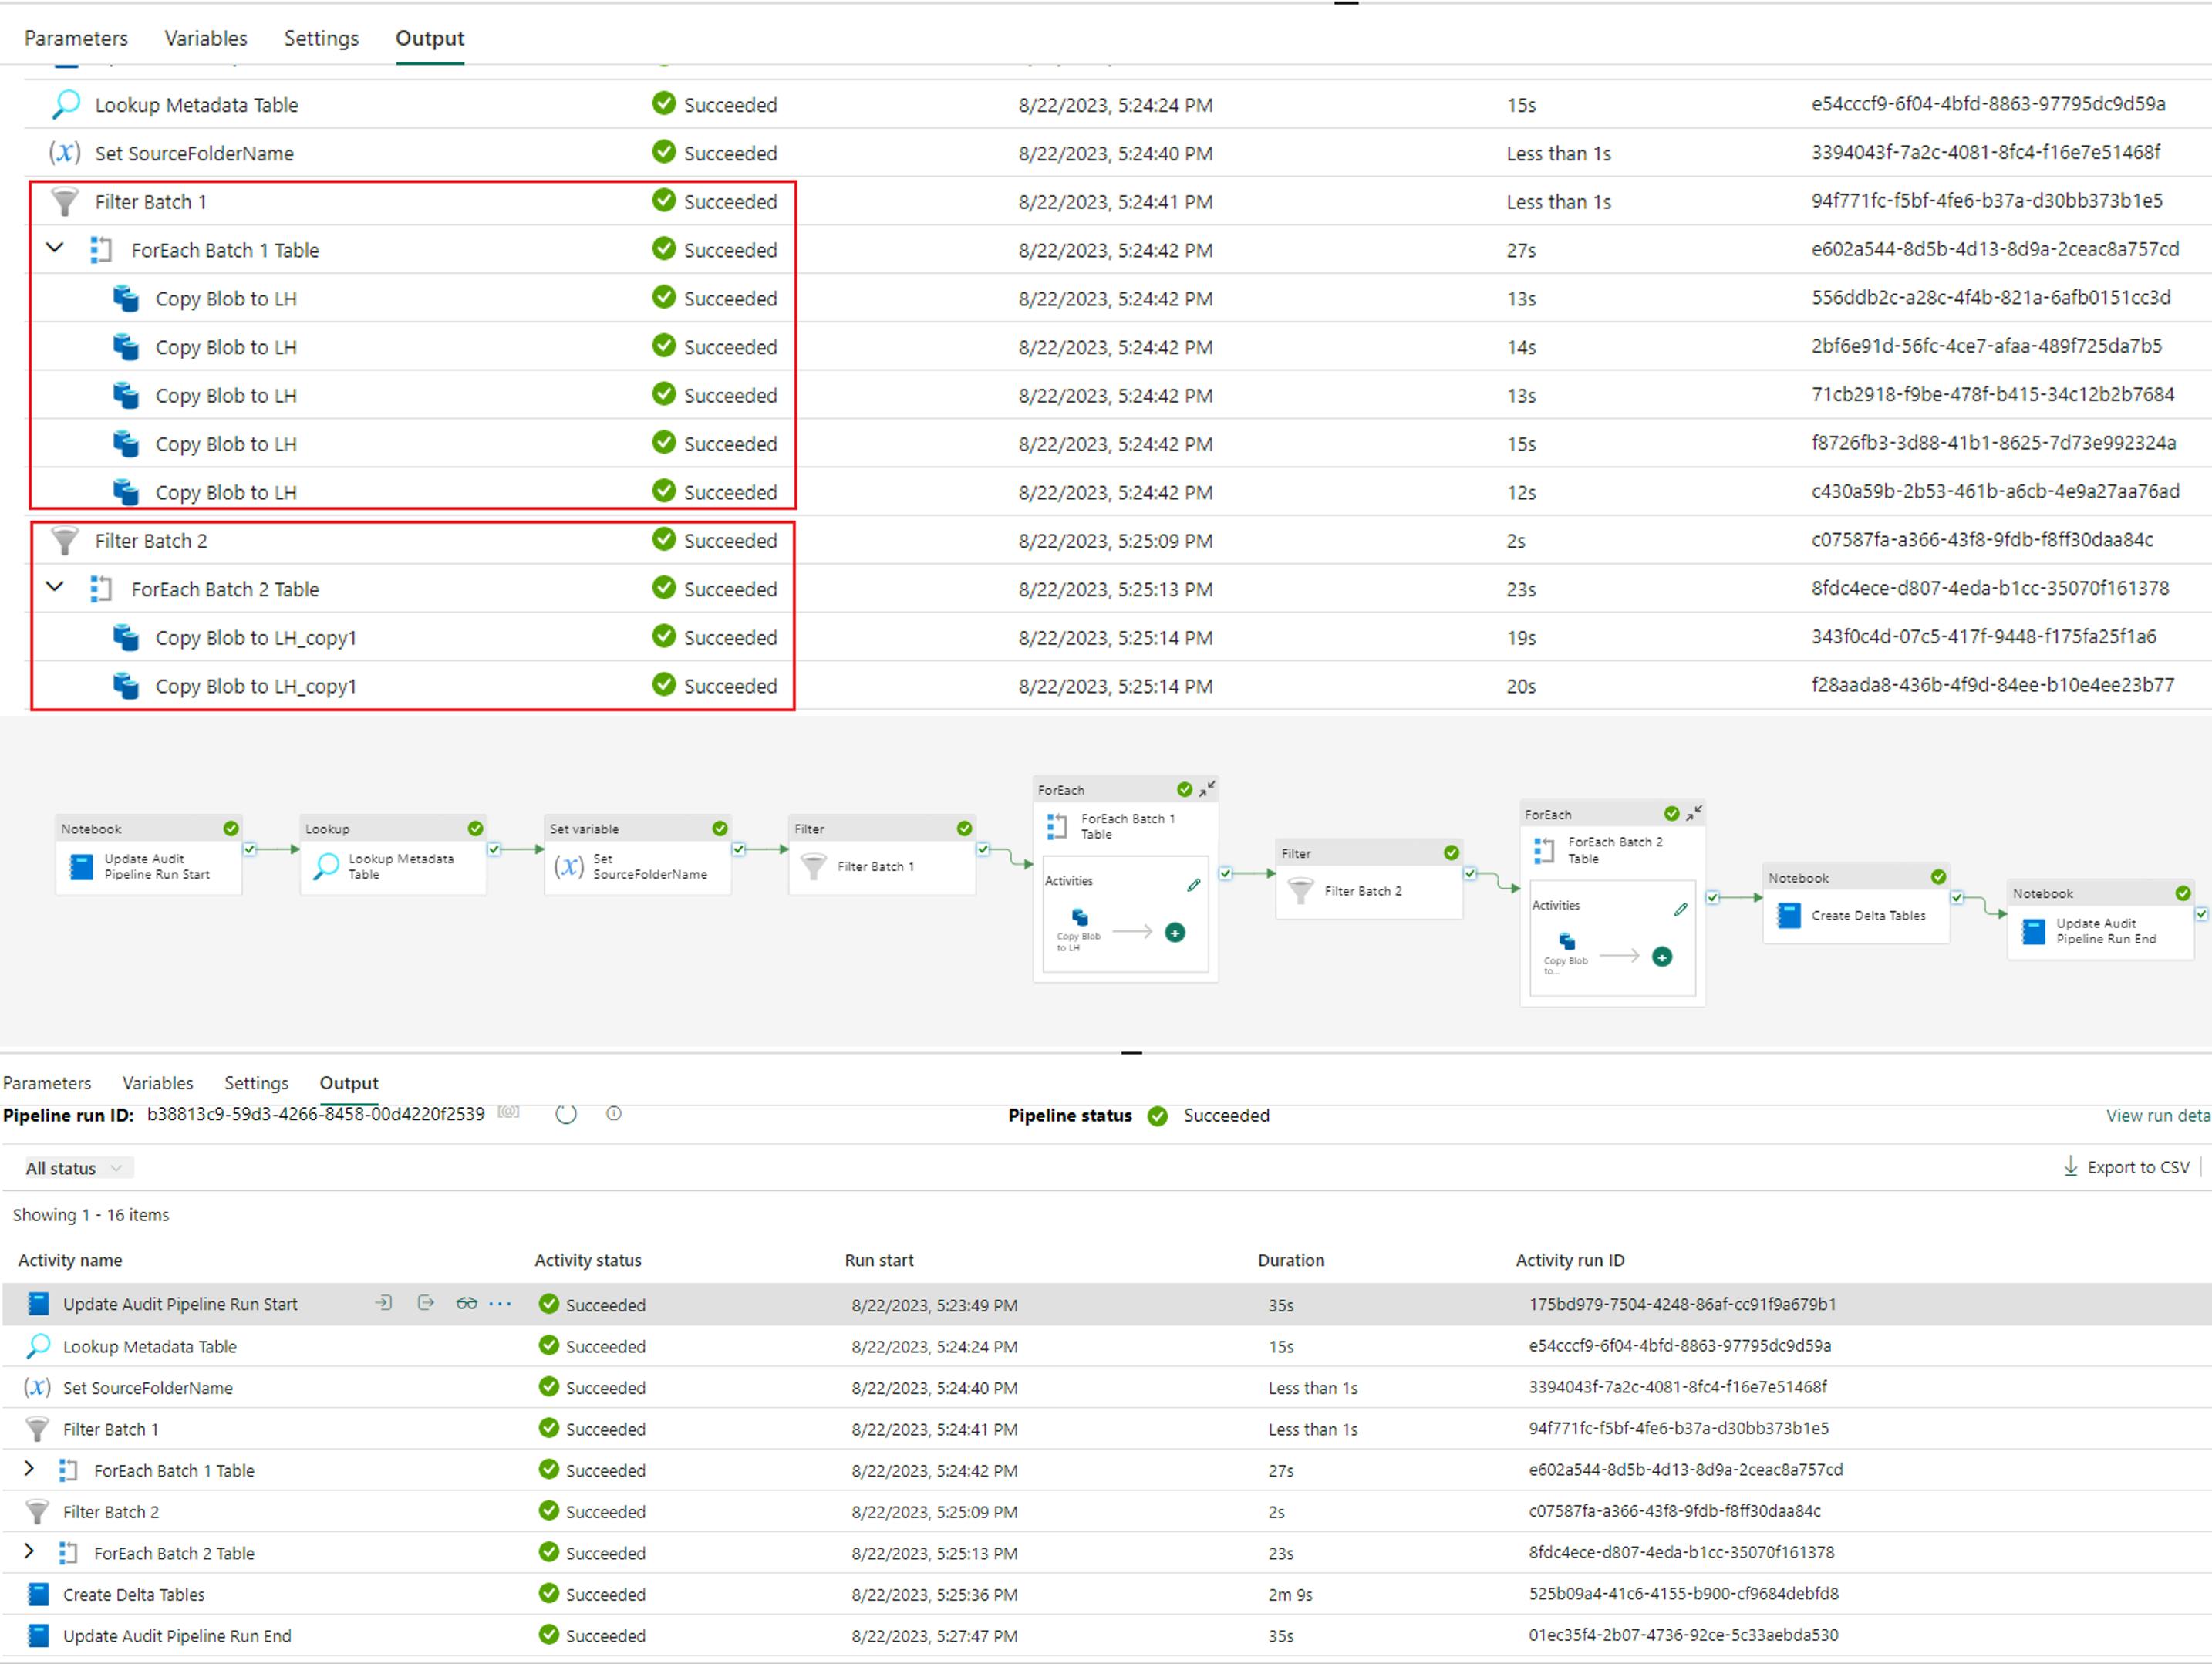 View metadata passing through for batch 1 and batch 2 tables and finalizing filter and batch data for data pipelines